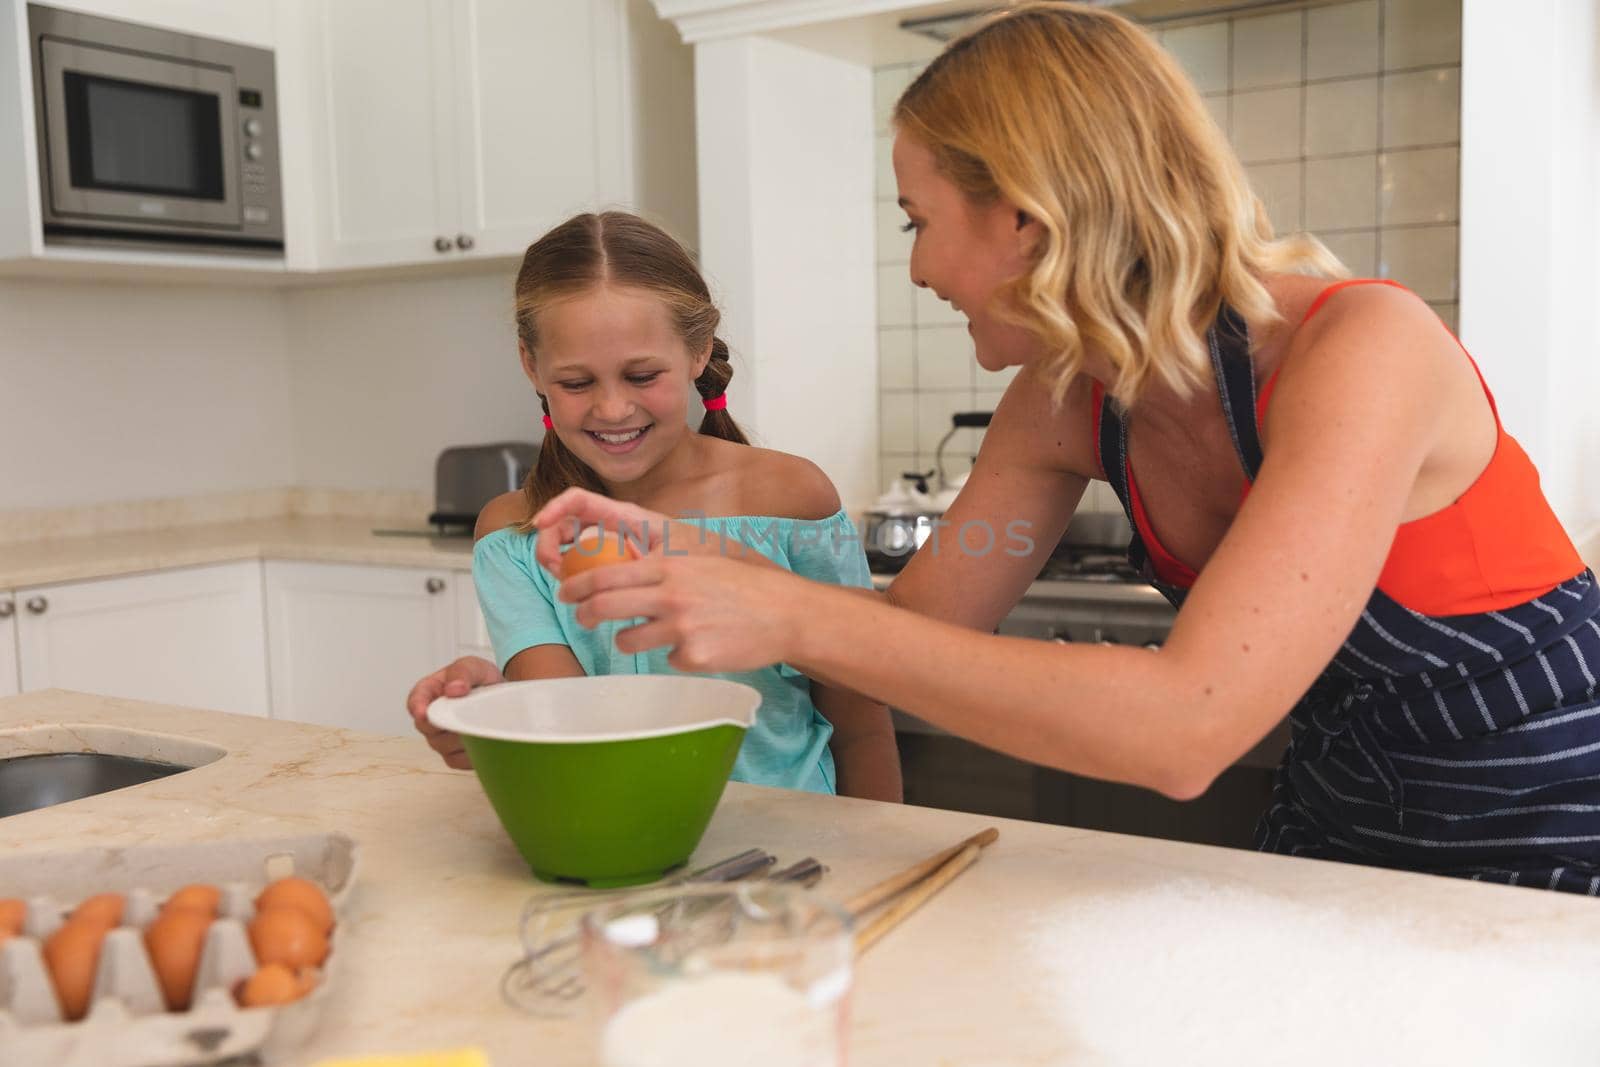 Caucasian mother and daughter baking and smiling in kitchen. family enjoying quality free time preparing food together.